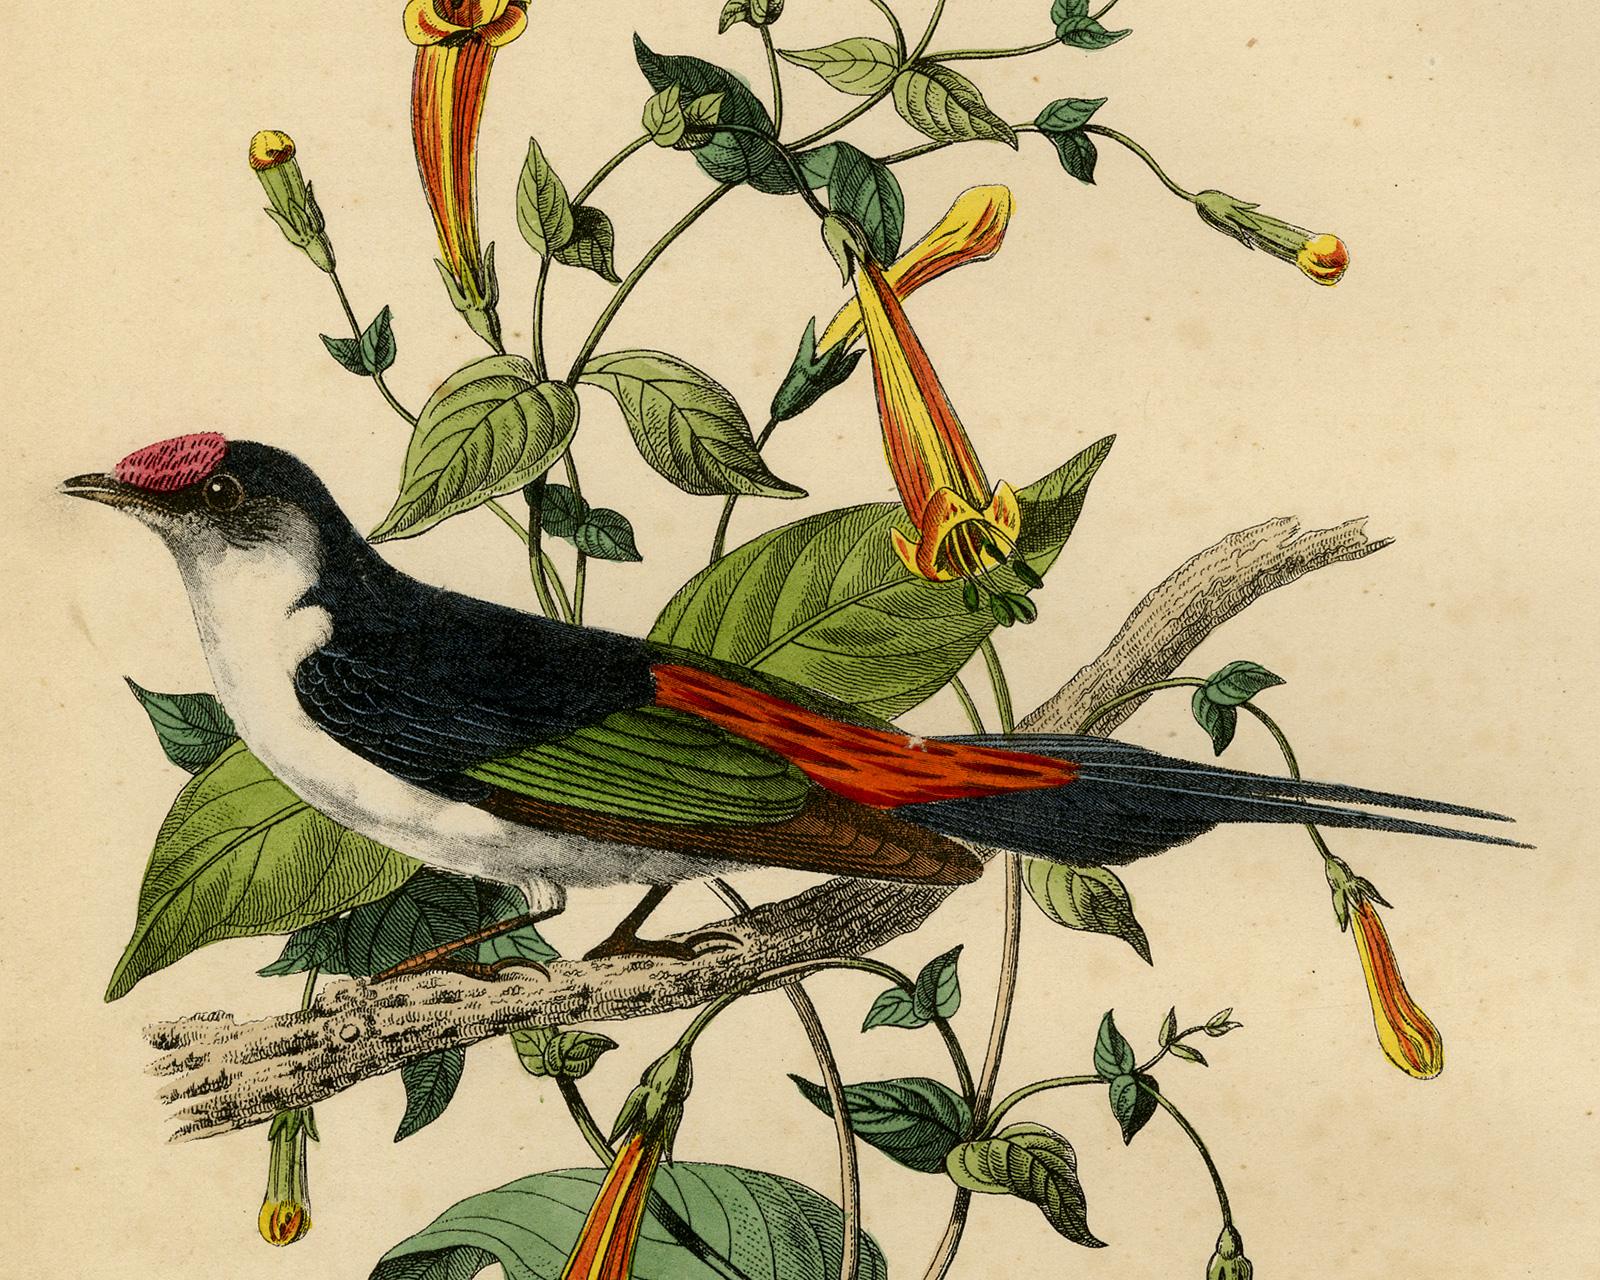 Antique print of a pin-tailed manakin by Le Maout - Engraving - 19th c. - Old Masters Print by Jean-Emmanuel-Marie Le Maout